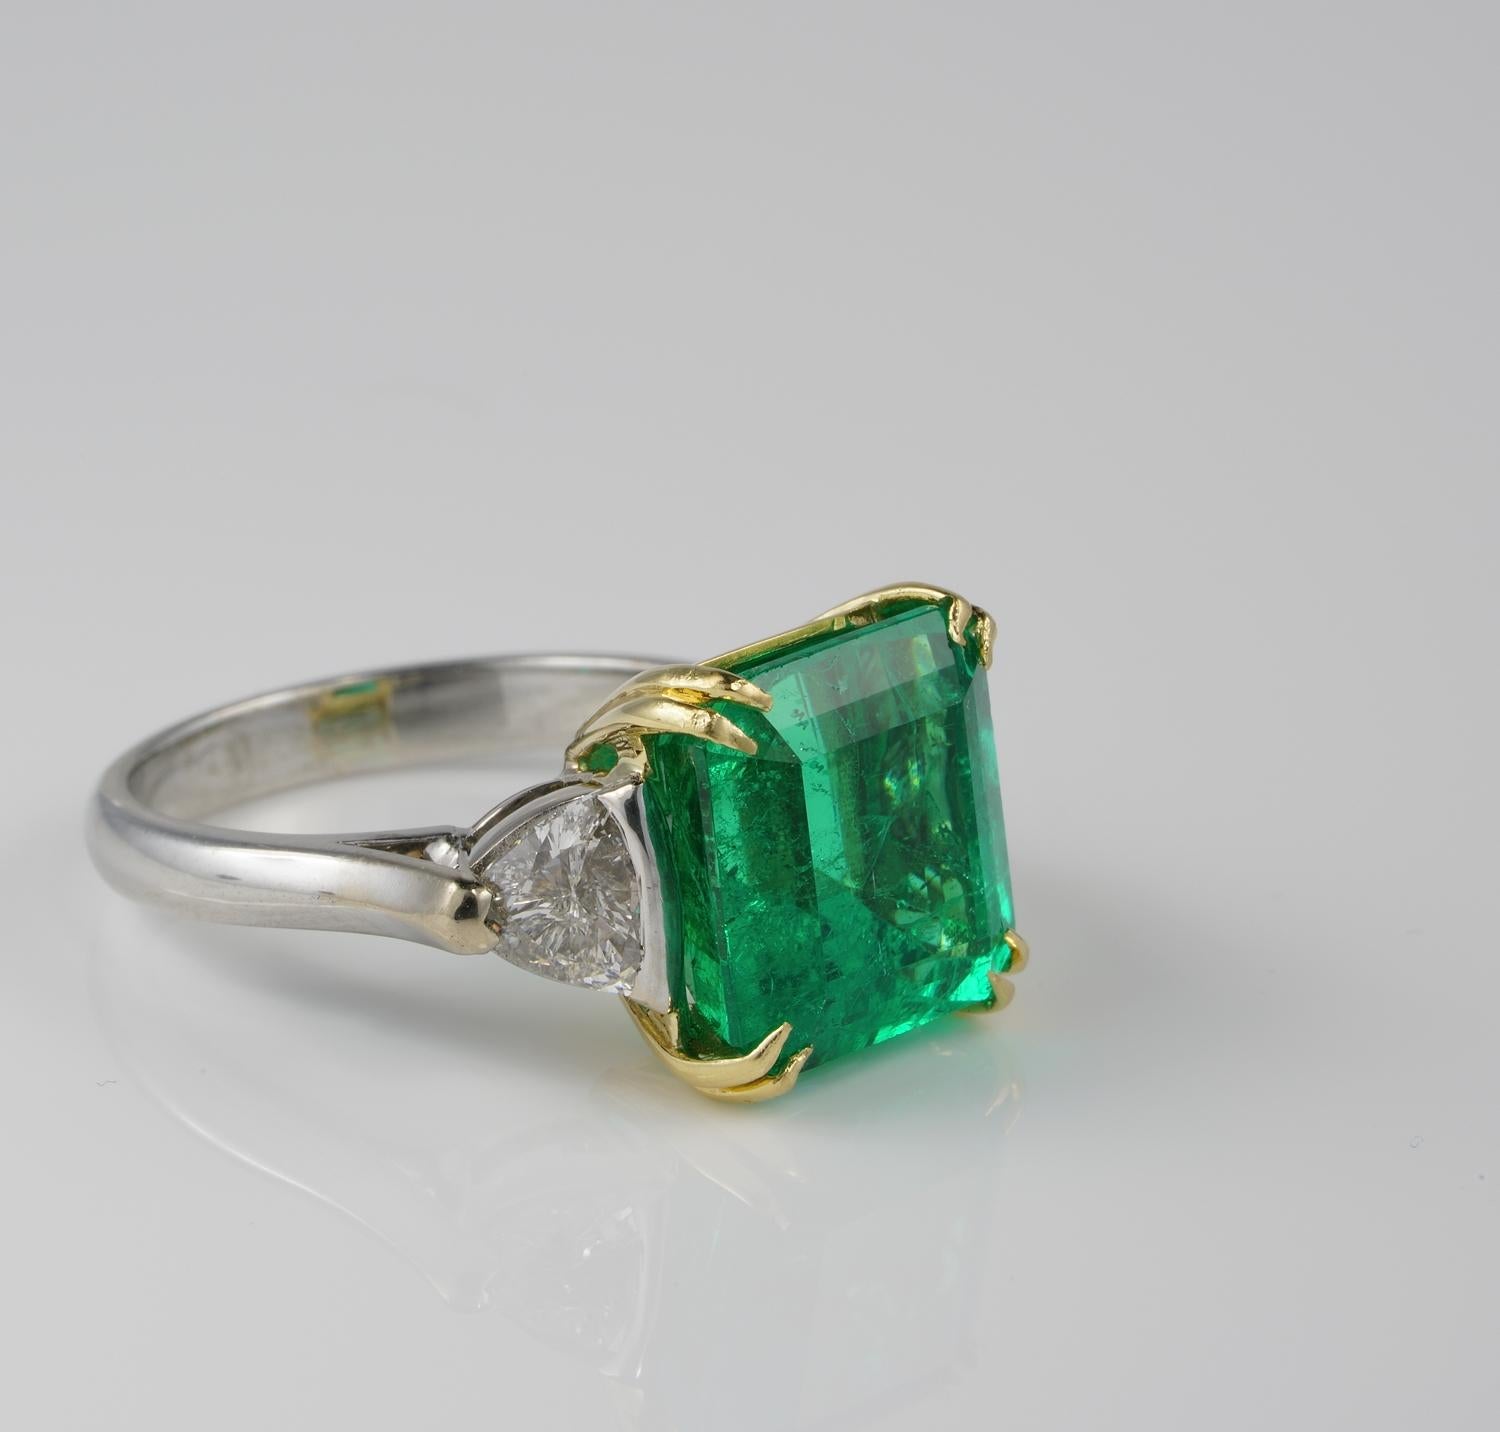 Colombian Luxurious Jungle Green
Extremely Beautiful, massive size, Natural Colombian Emerald Diamond ring
Comes fully certified for Colombian origin, 6.81 Ct weighted off mounting, only moderate oil
Very solid Emerald, richly saturated colour,